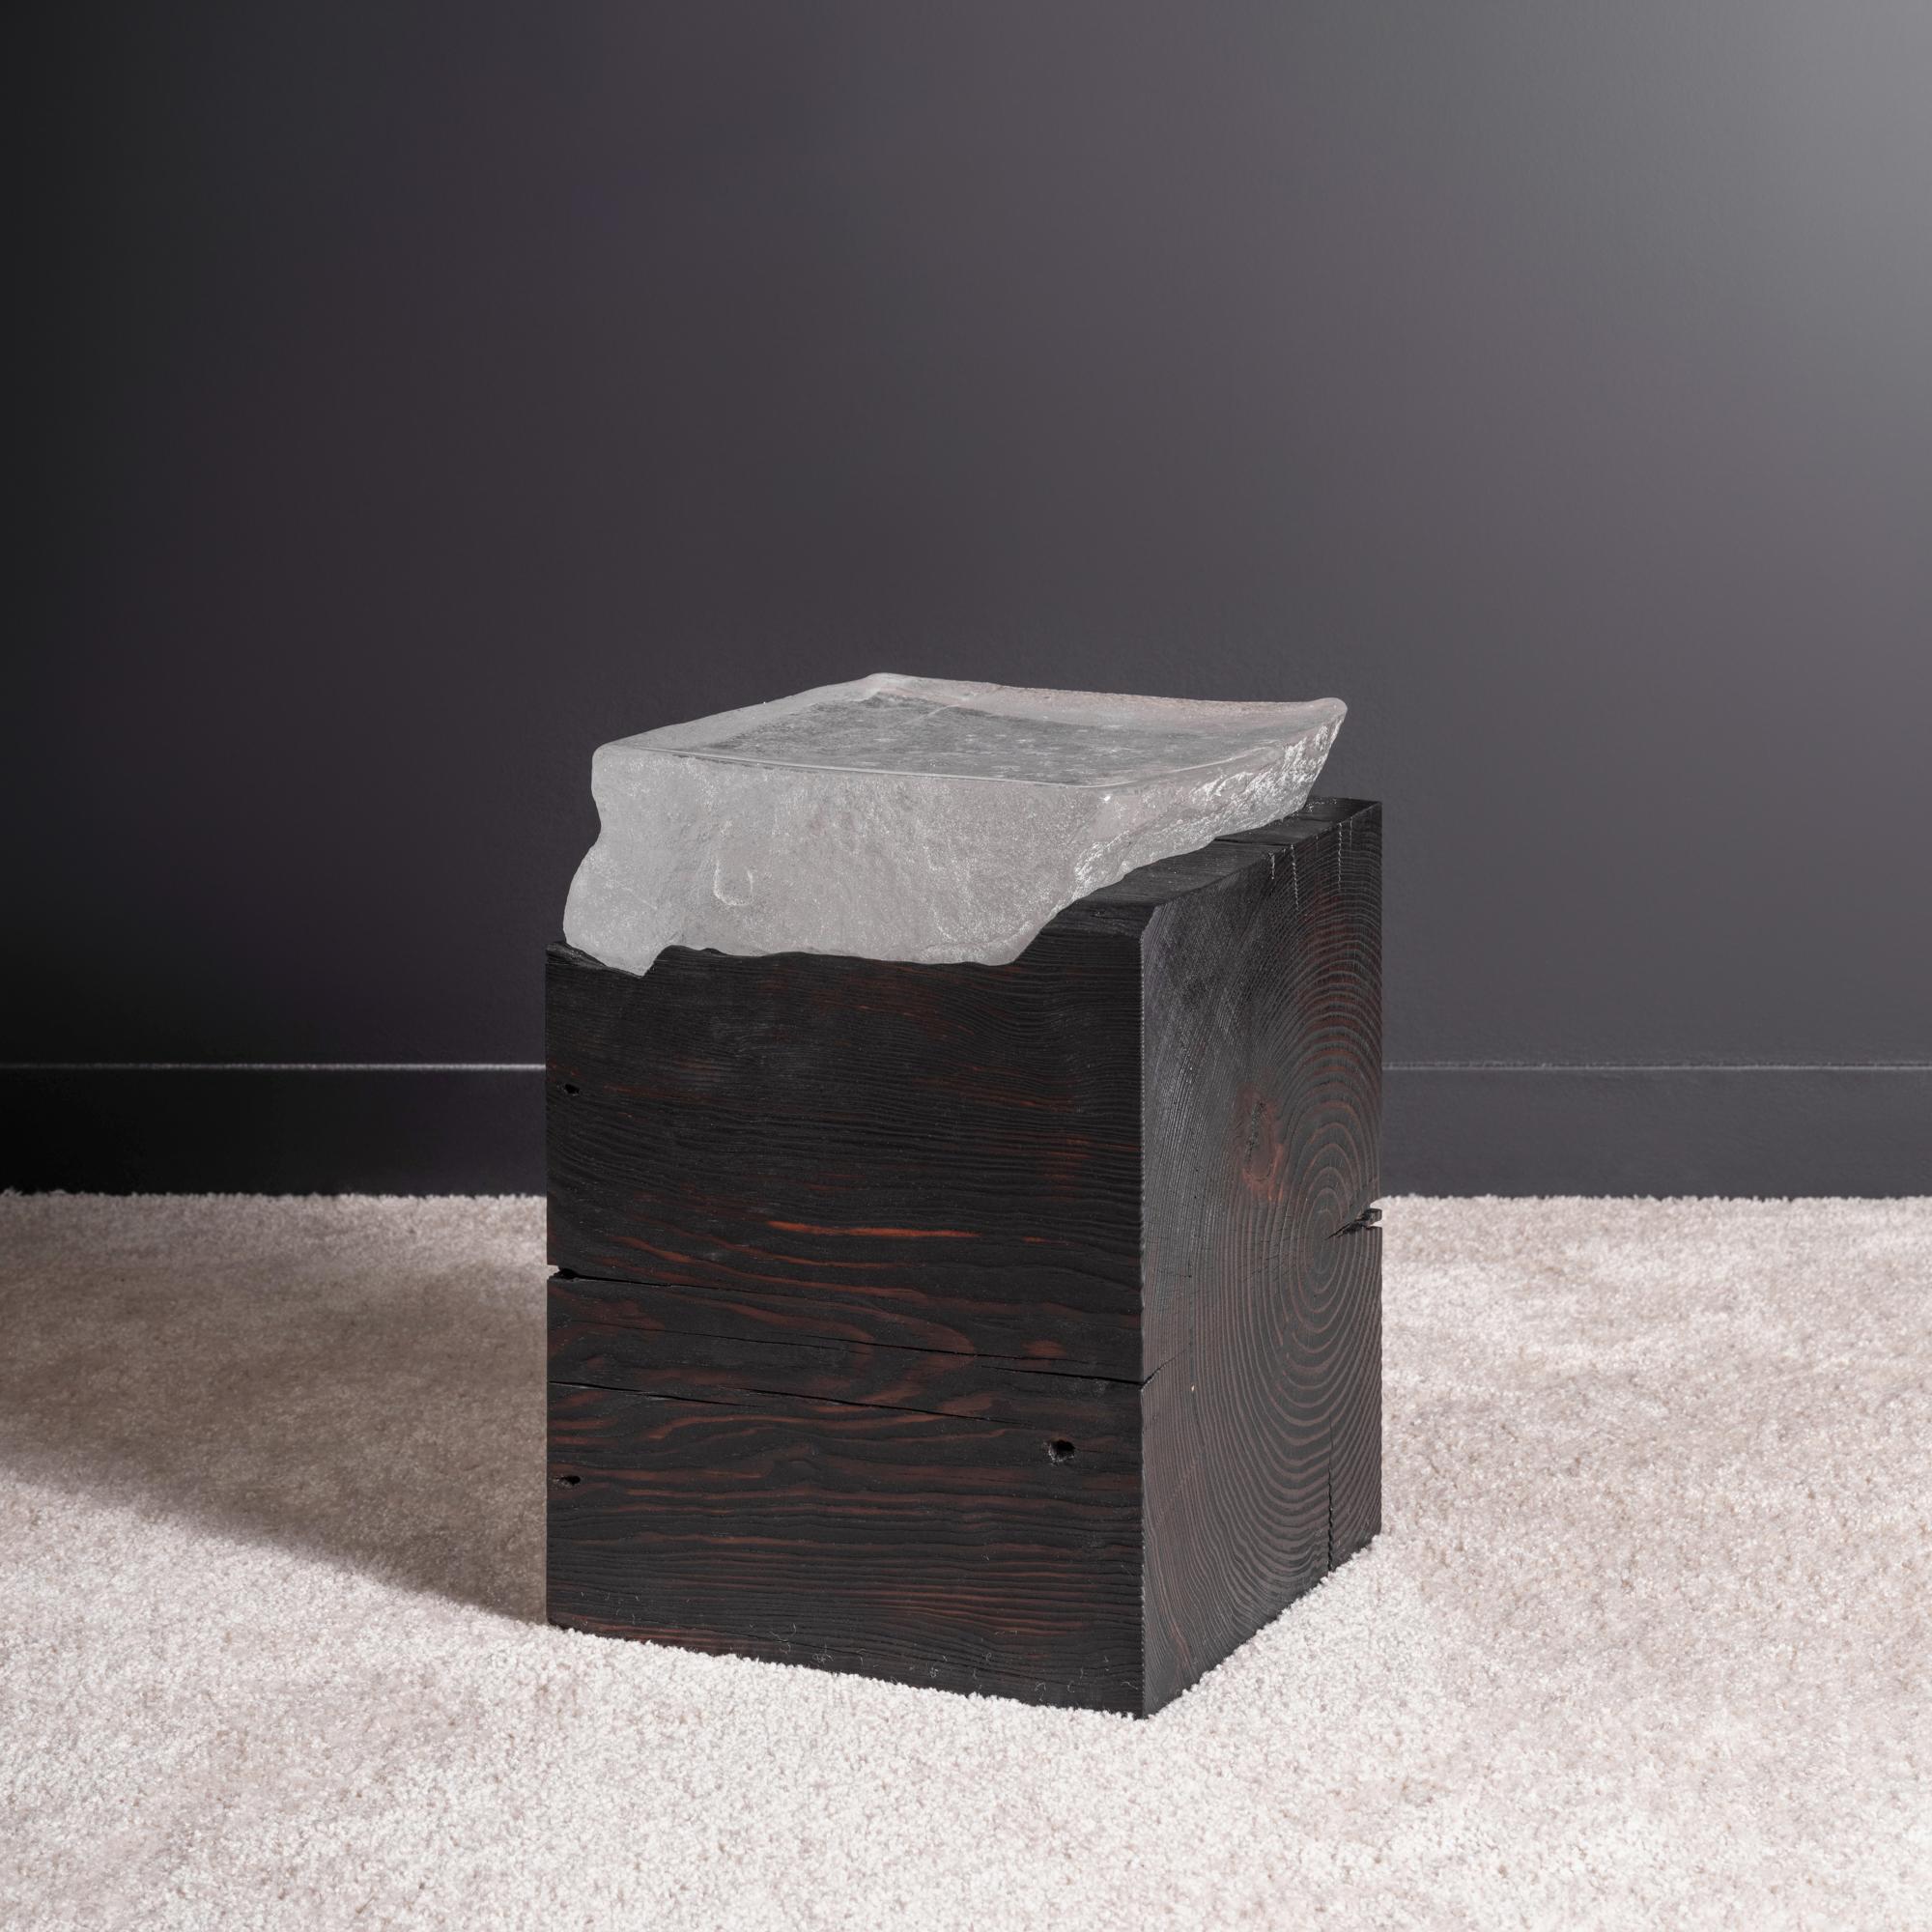 One-of-a-kind side or end table in hand-carved and charred reclaimed wood with cast glass top. Fueled by curiosity while pushing function and materiality to its limits, this piece would make an evocative yet understated sculptural accent to your